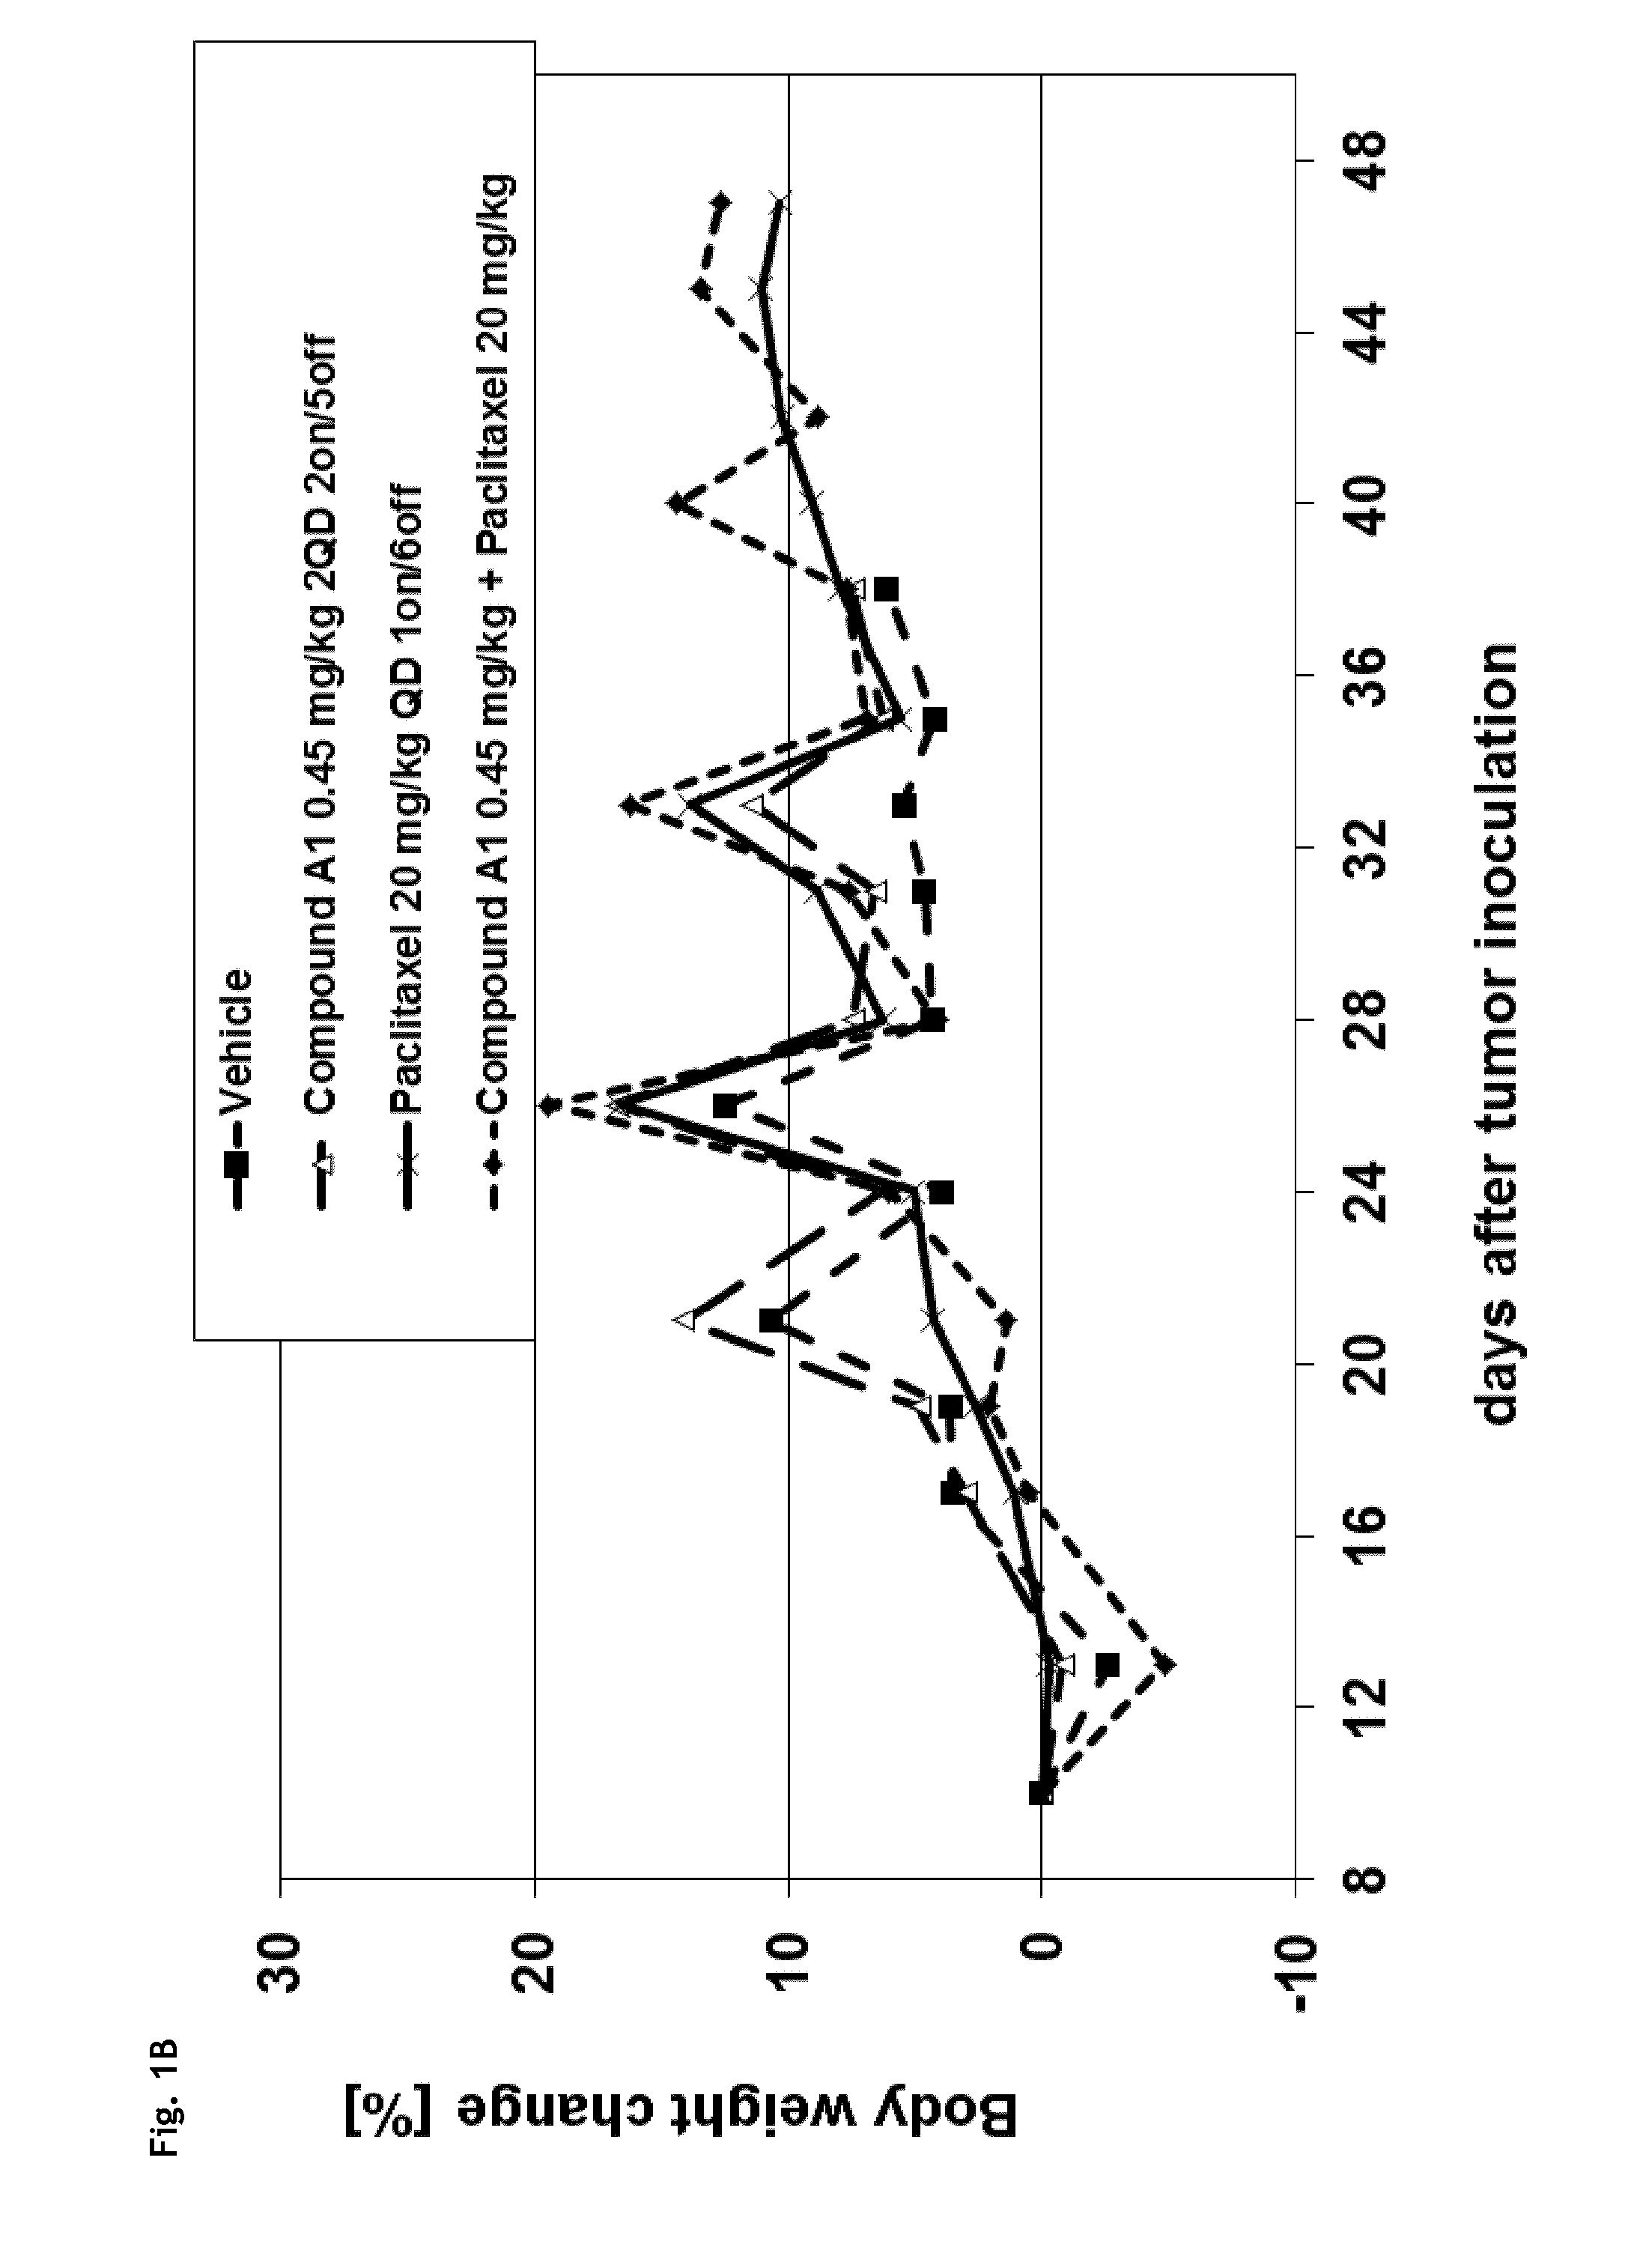 Combinations for the treatment of cancer comprising a mps-1 kinase inhibitor and a mitotic inhibitor